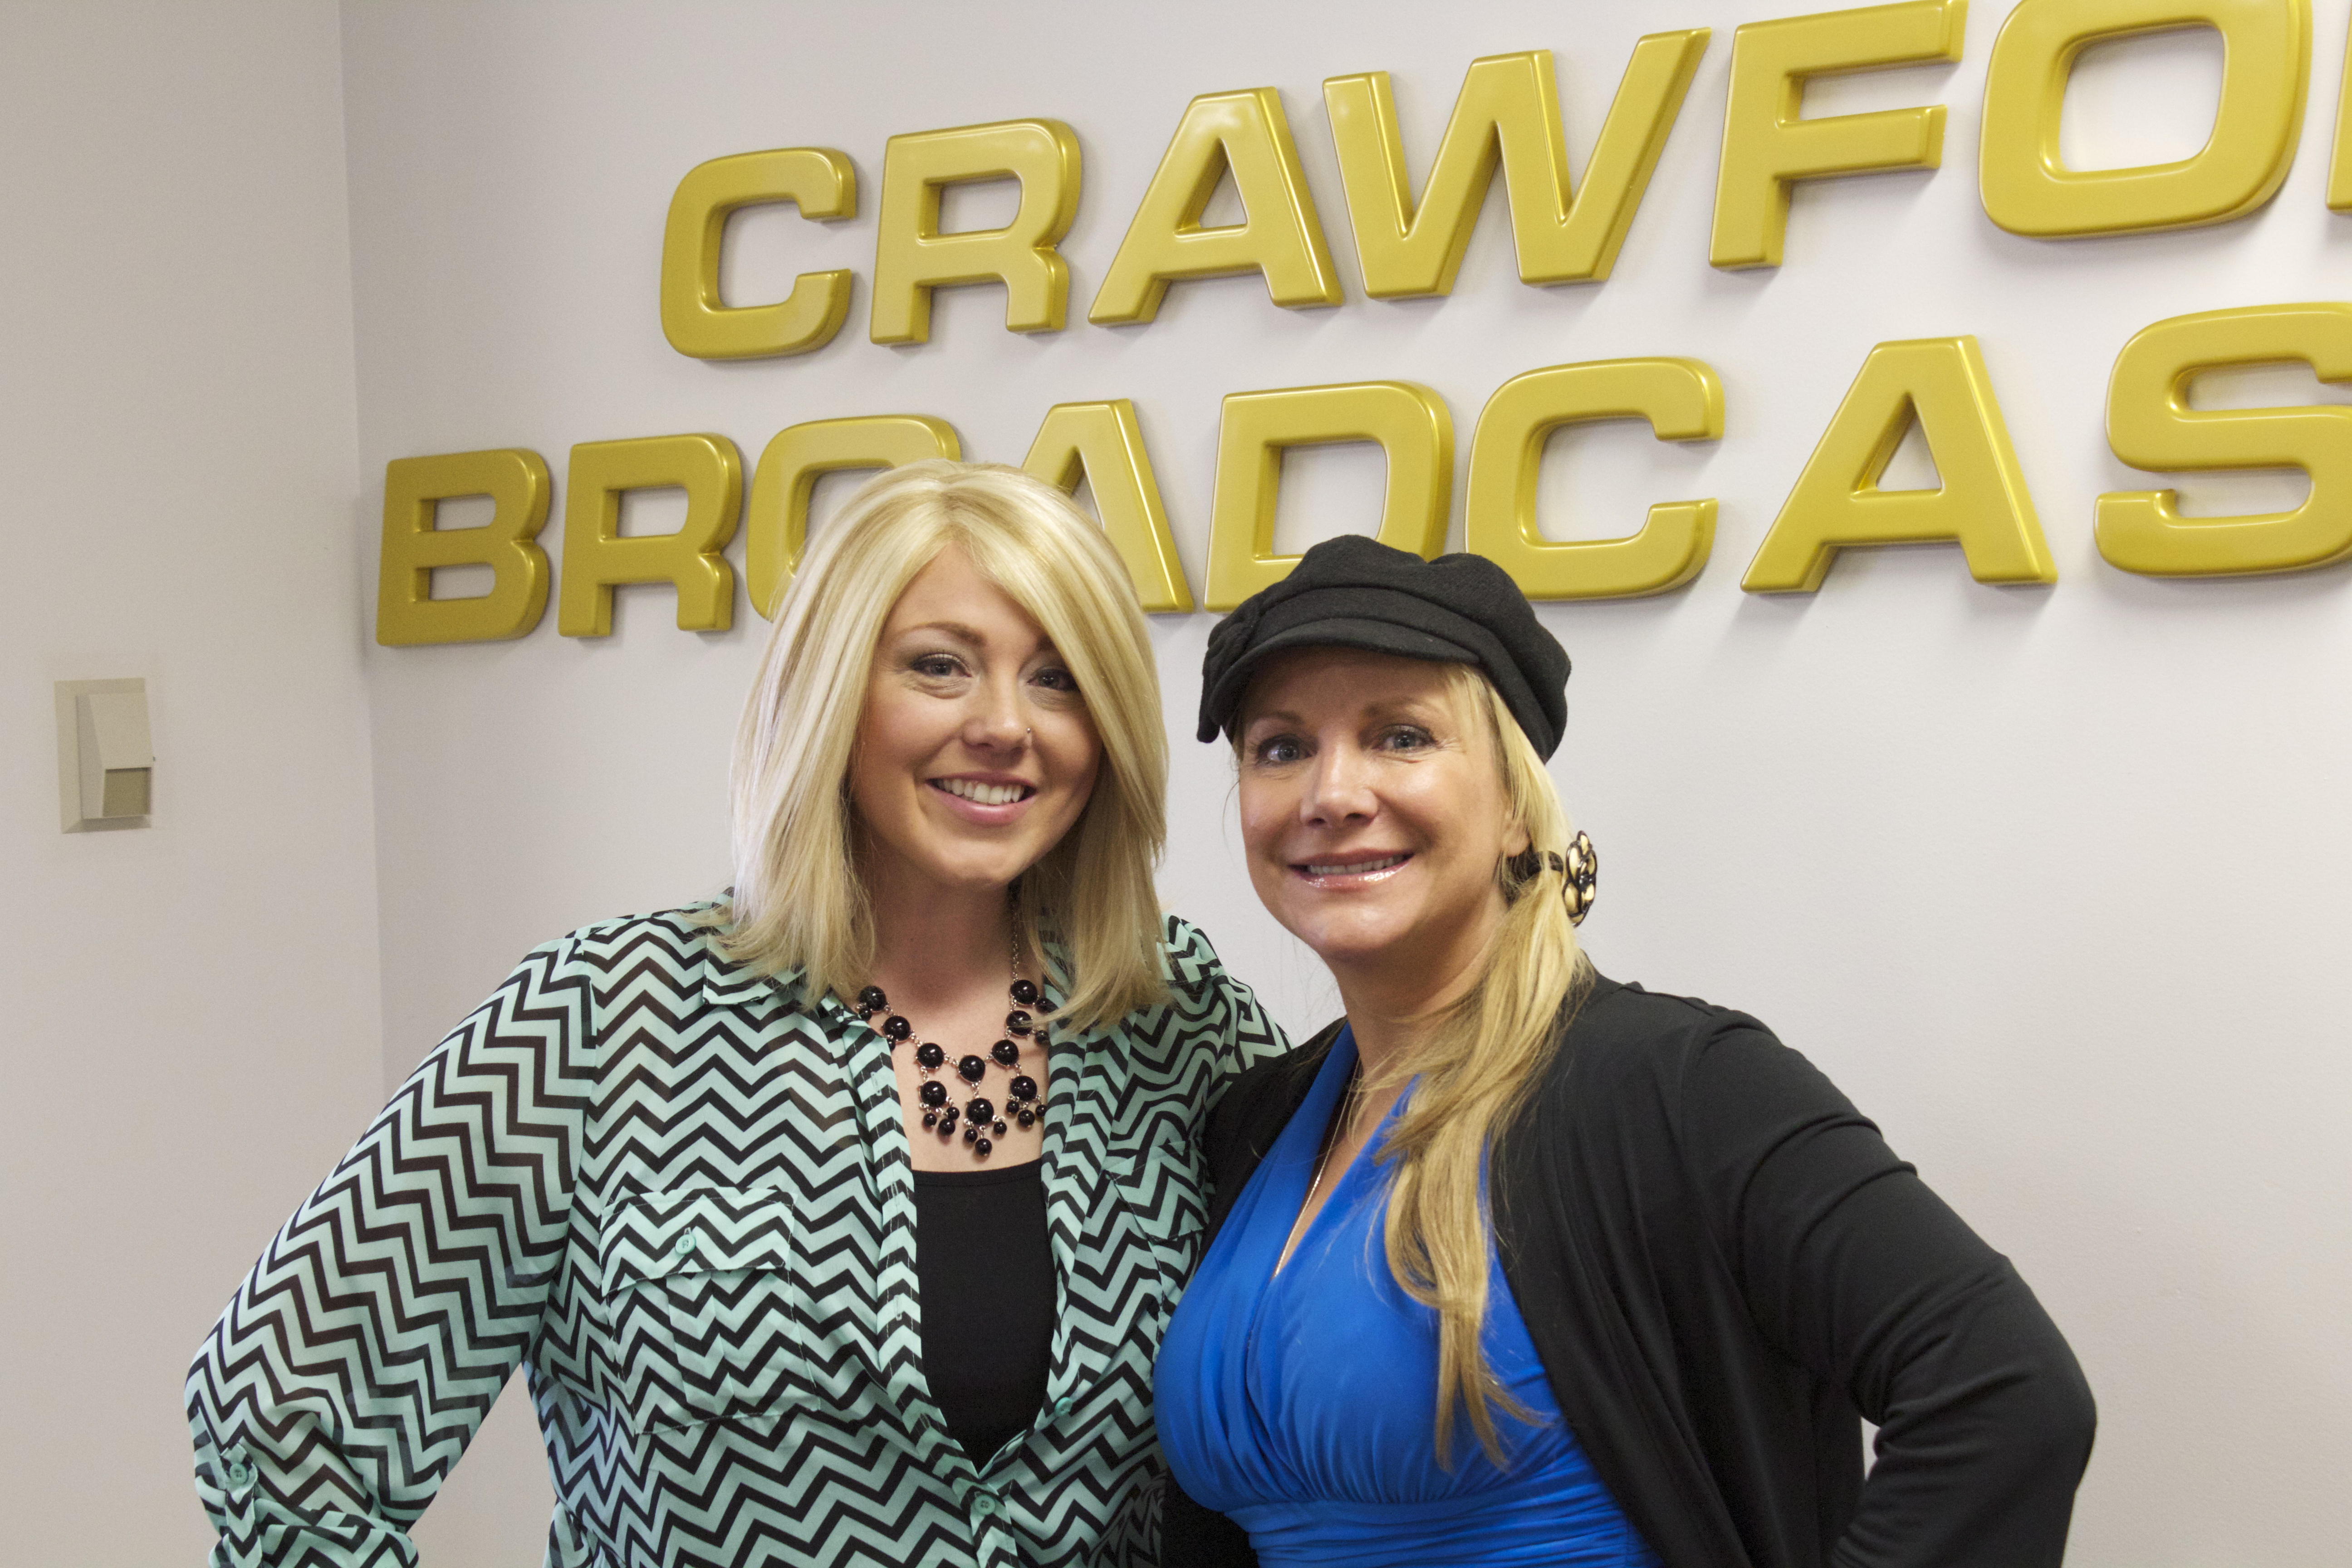 Stephanie and Angie after a great show on 810 KLVZ The Good News! (March 2013)